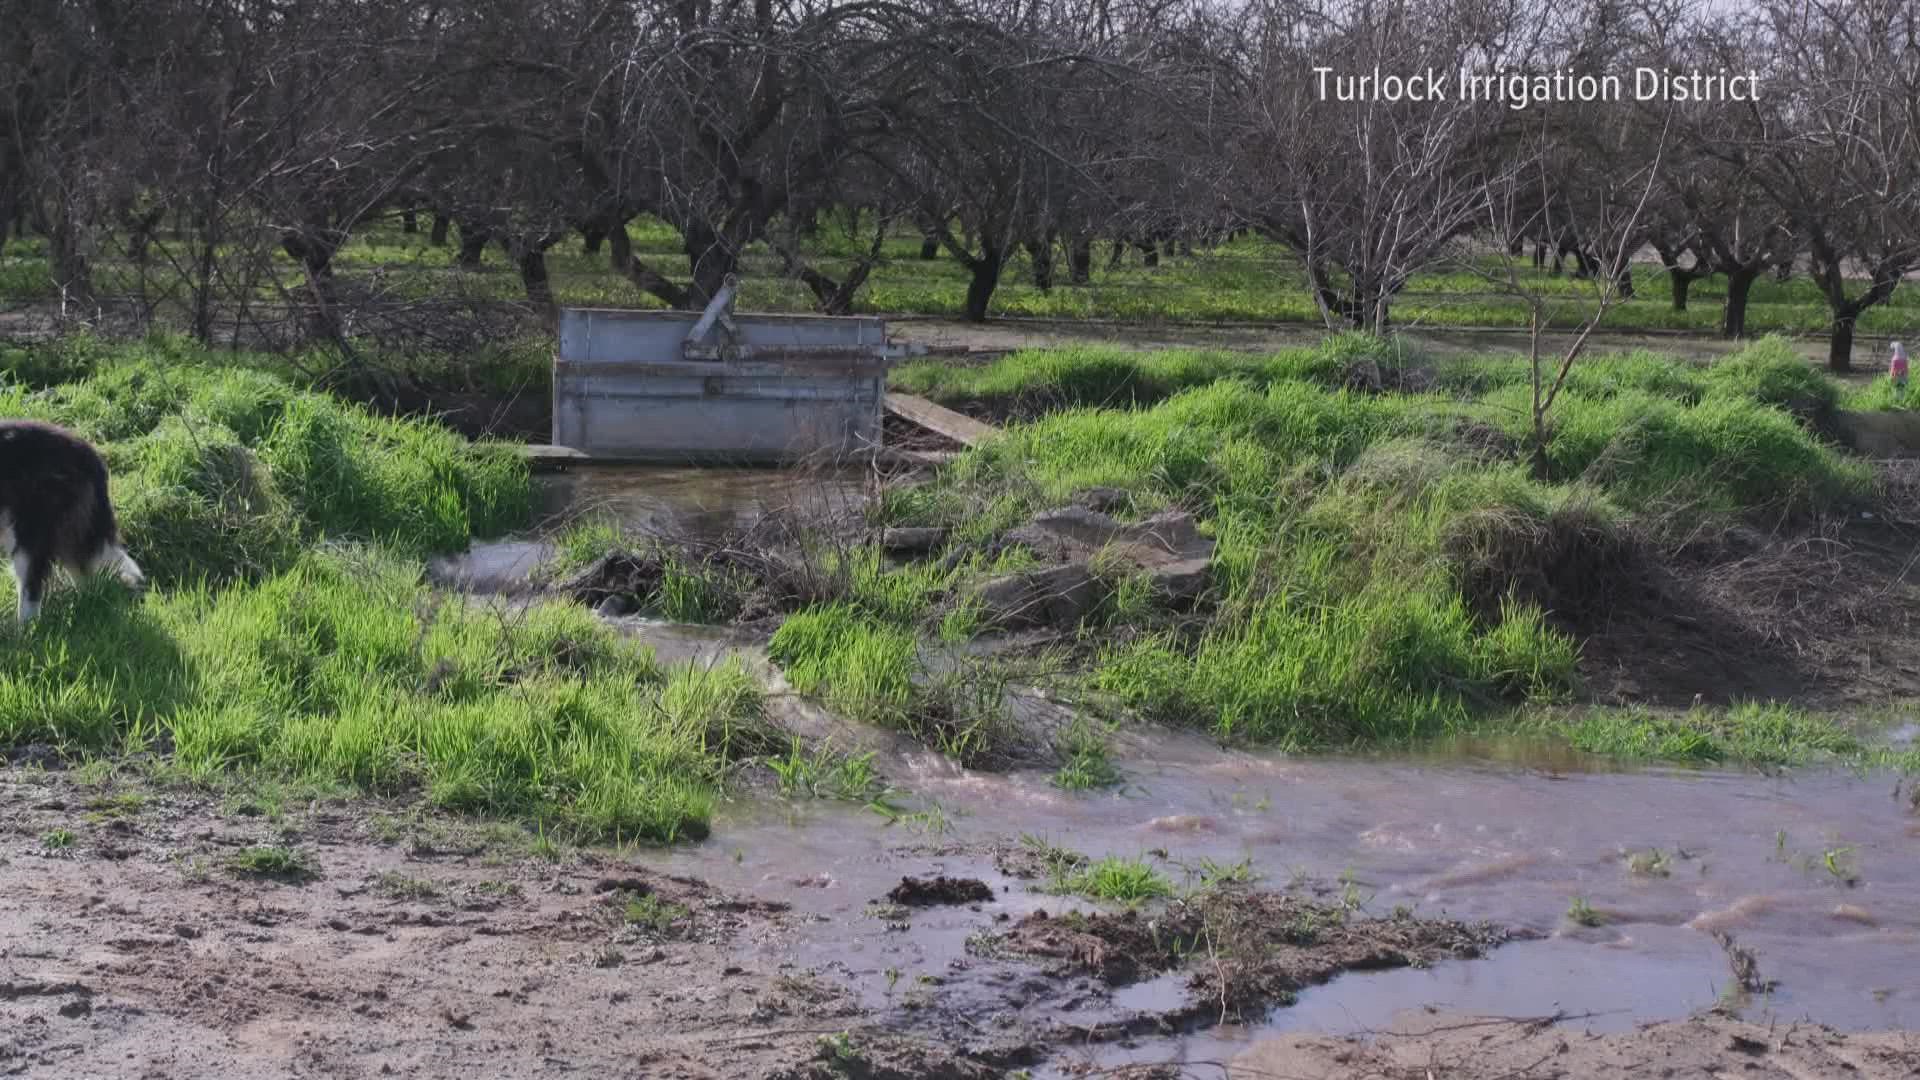 Turlock Irrigation District is trying to better capture and utilize the storm water that might be flushed out to ocean through FloodMAR.